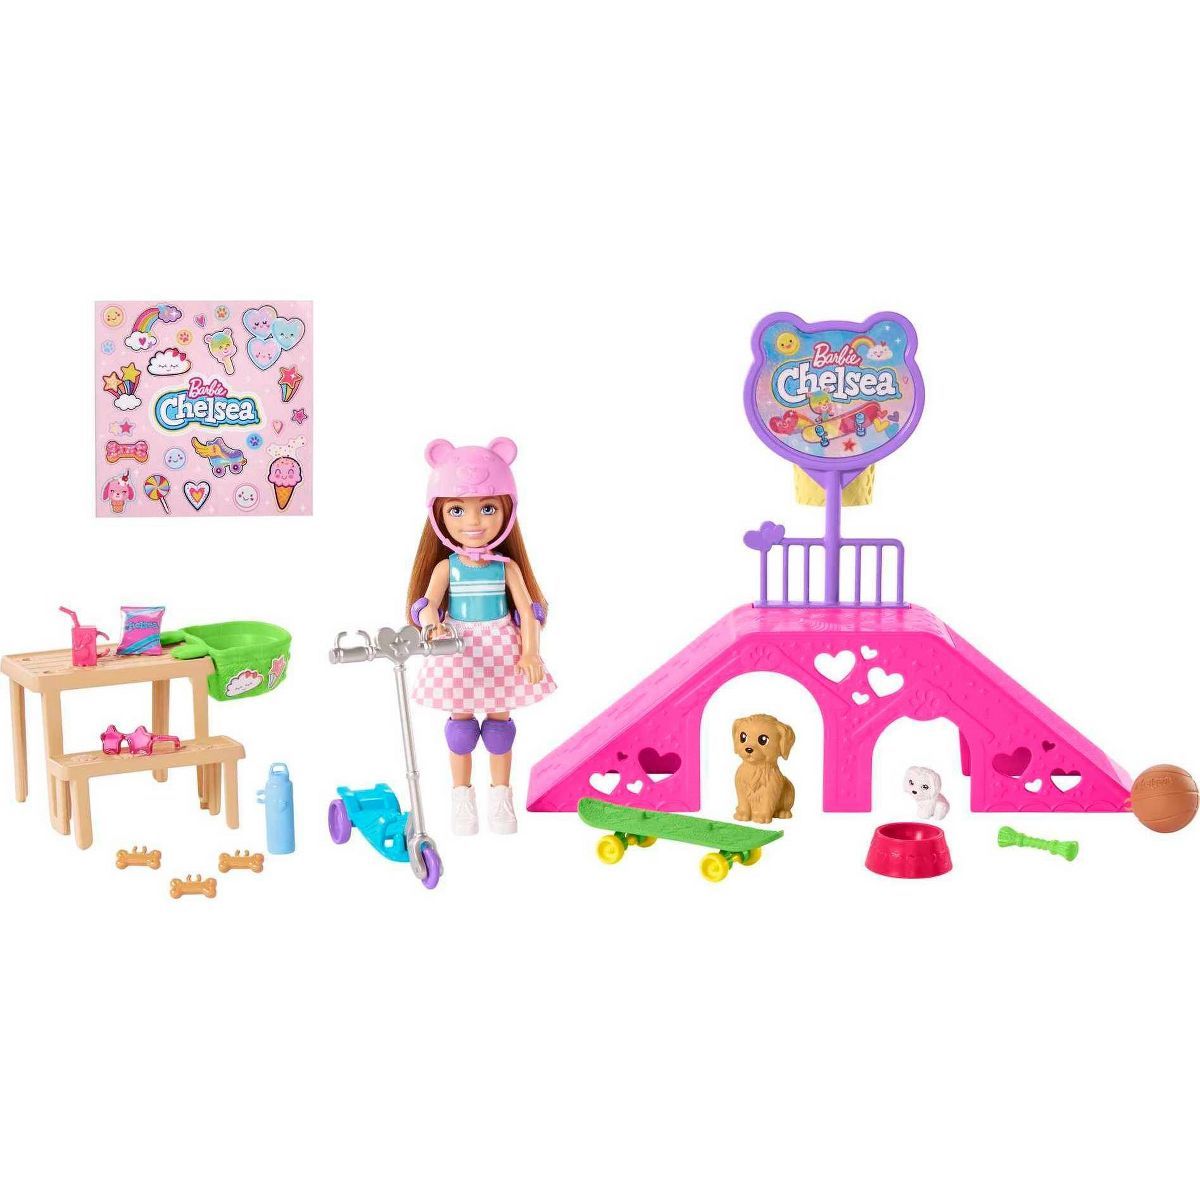 Barbie Chelsea Doll and Accessories Skatepark Playset with 2 Puppies and 15+ pc | Target